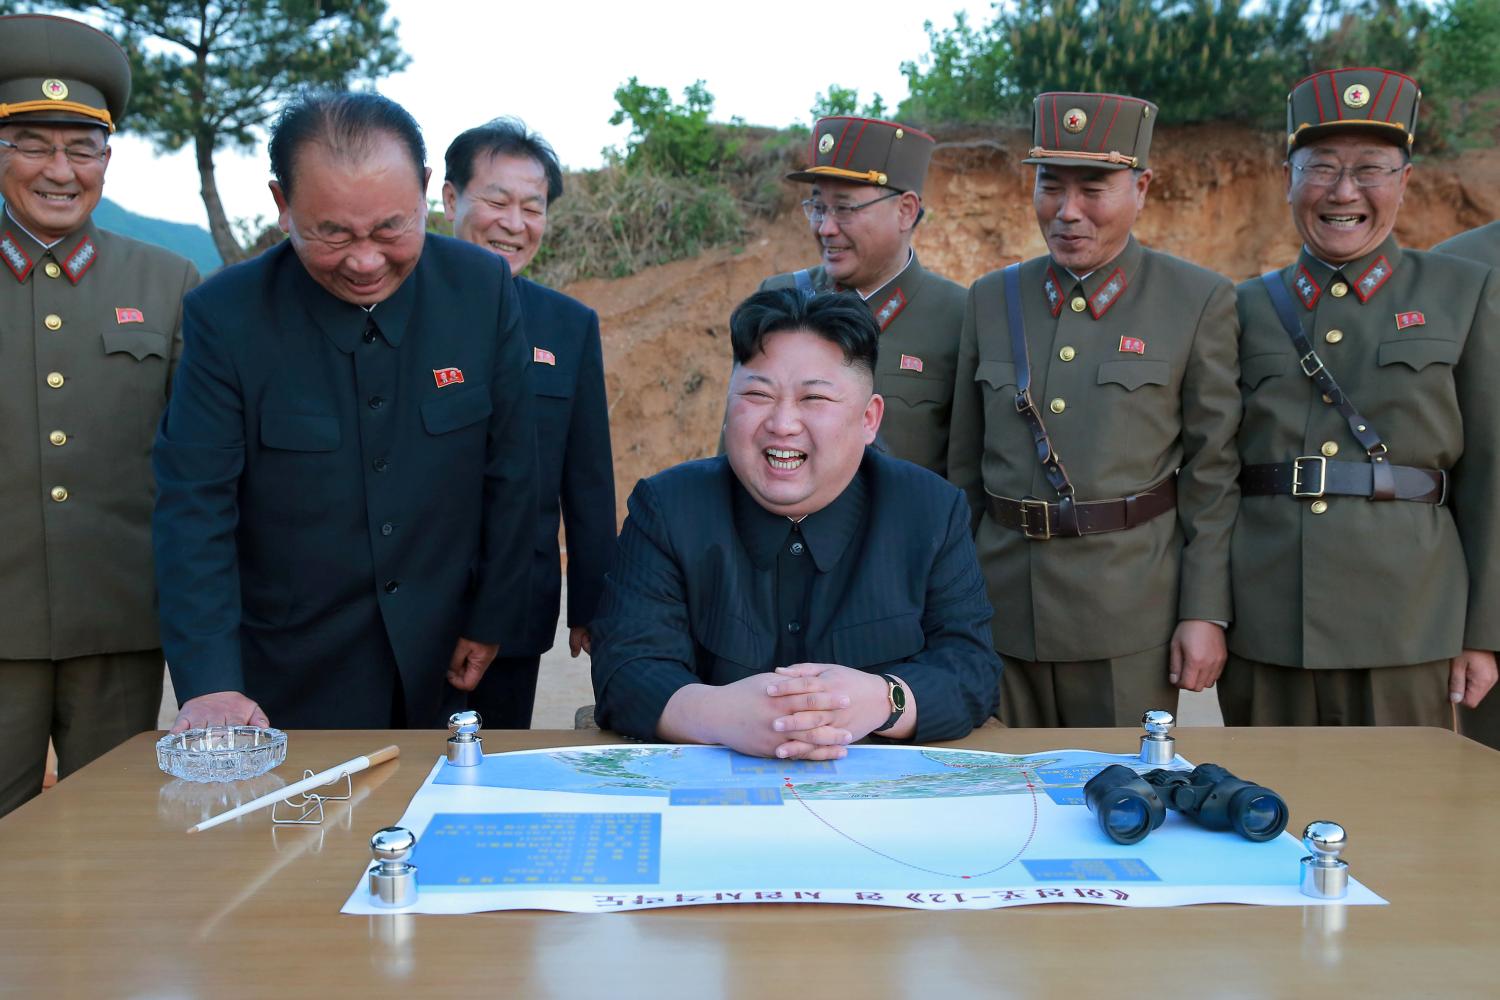 FILE PHOTO - North Korean leader Kim Jong Un reacts during the long-range strategic ballistic rocket Hwasong-12 (Mars-12) test launch in this undated photo released by North Korea's Korean Central News Agency (KCNA) on May 15, 2017. KCNA via REUTERS/File Photo REUTERS ATTENTION EDITORS - THIS IMAGE WAS PROVIDED BY A THIRD PARTY. REUTERS IS UNABLE TO INDEPENDENTLY VERIFY THIS IMAGE. NO THIRD PARTY SALES. SOUTH KOREA OUT. - RTX3DCTZ